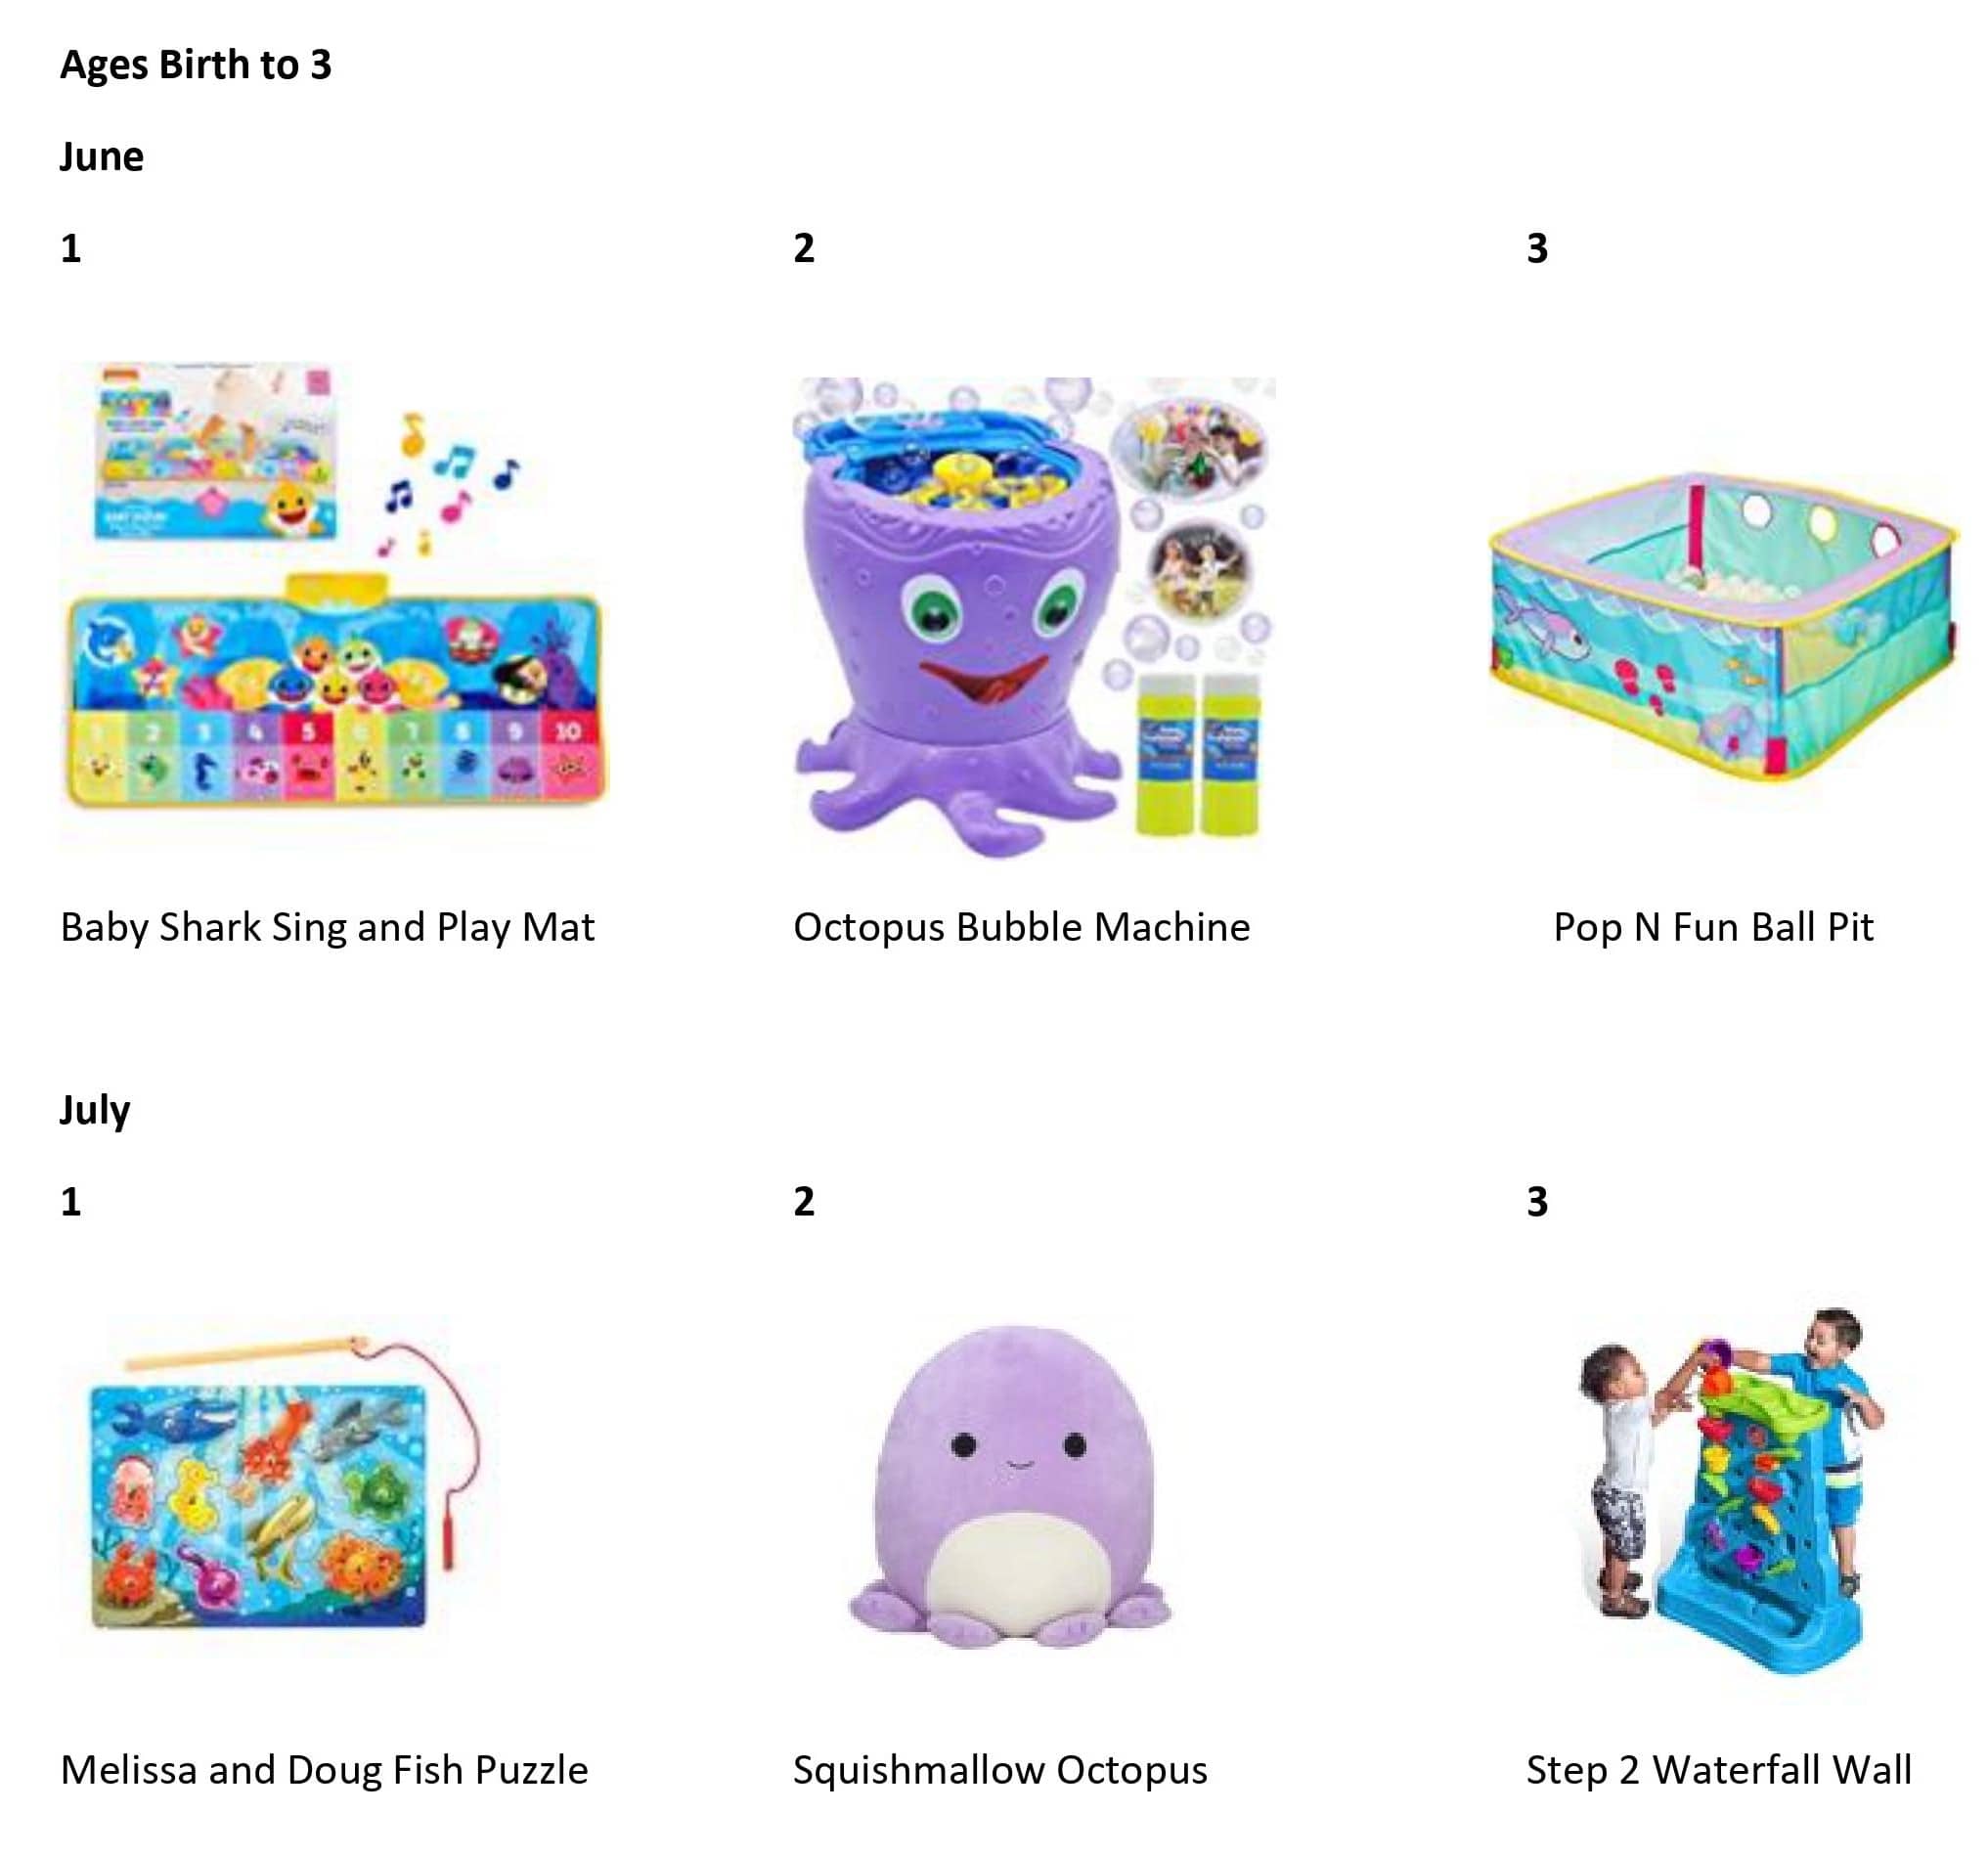 ages 0-3 sing pplay may bubble machine ball pit fish puzzle squishmallow  octopus waterfall wall